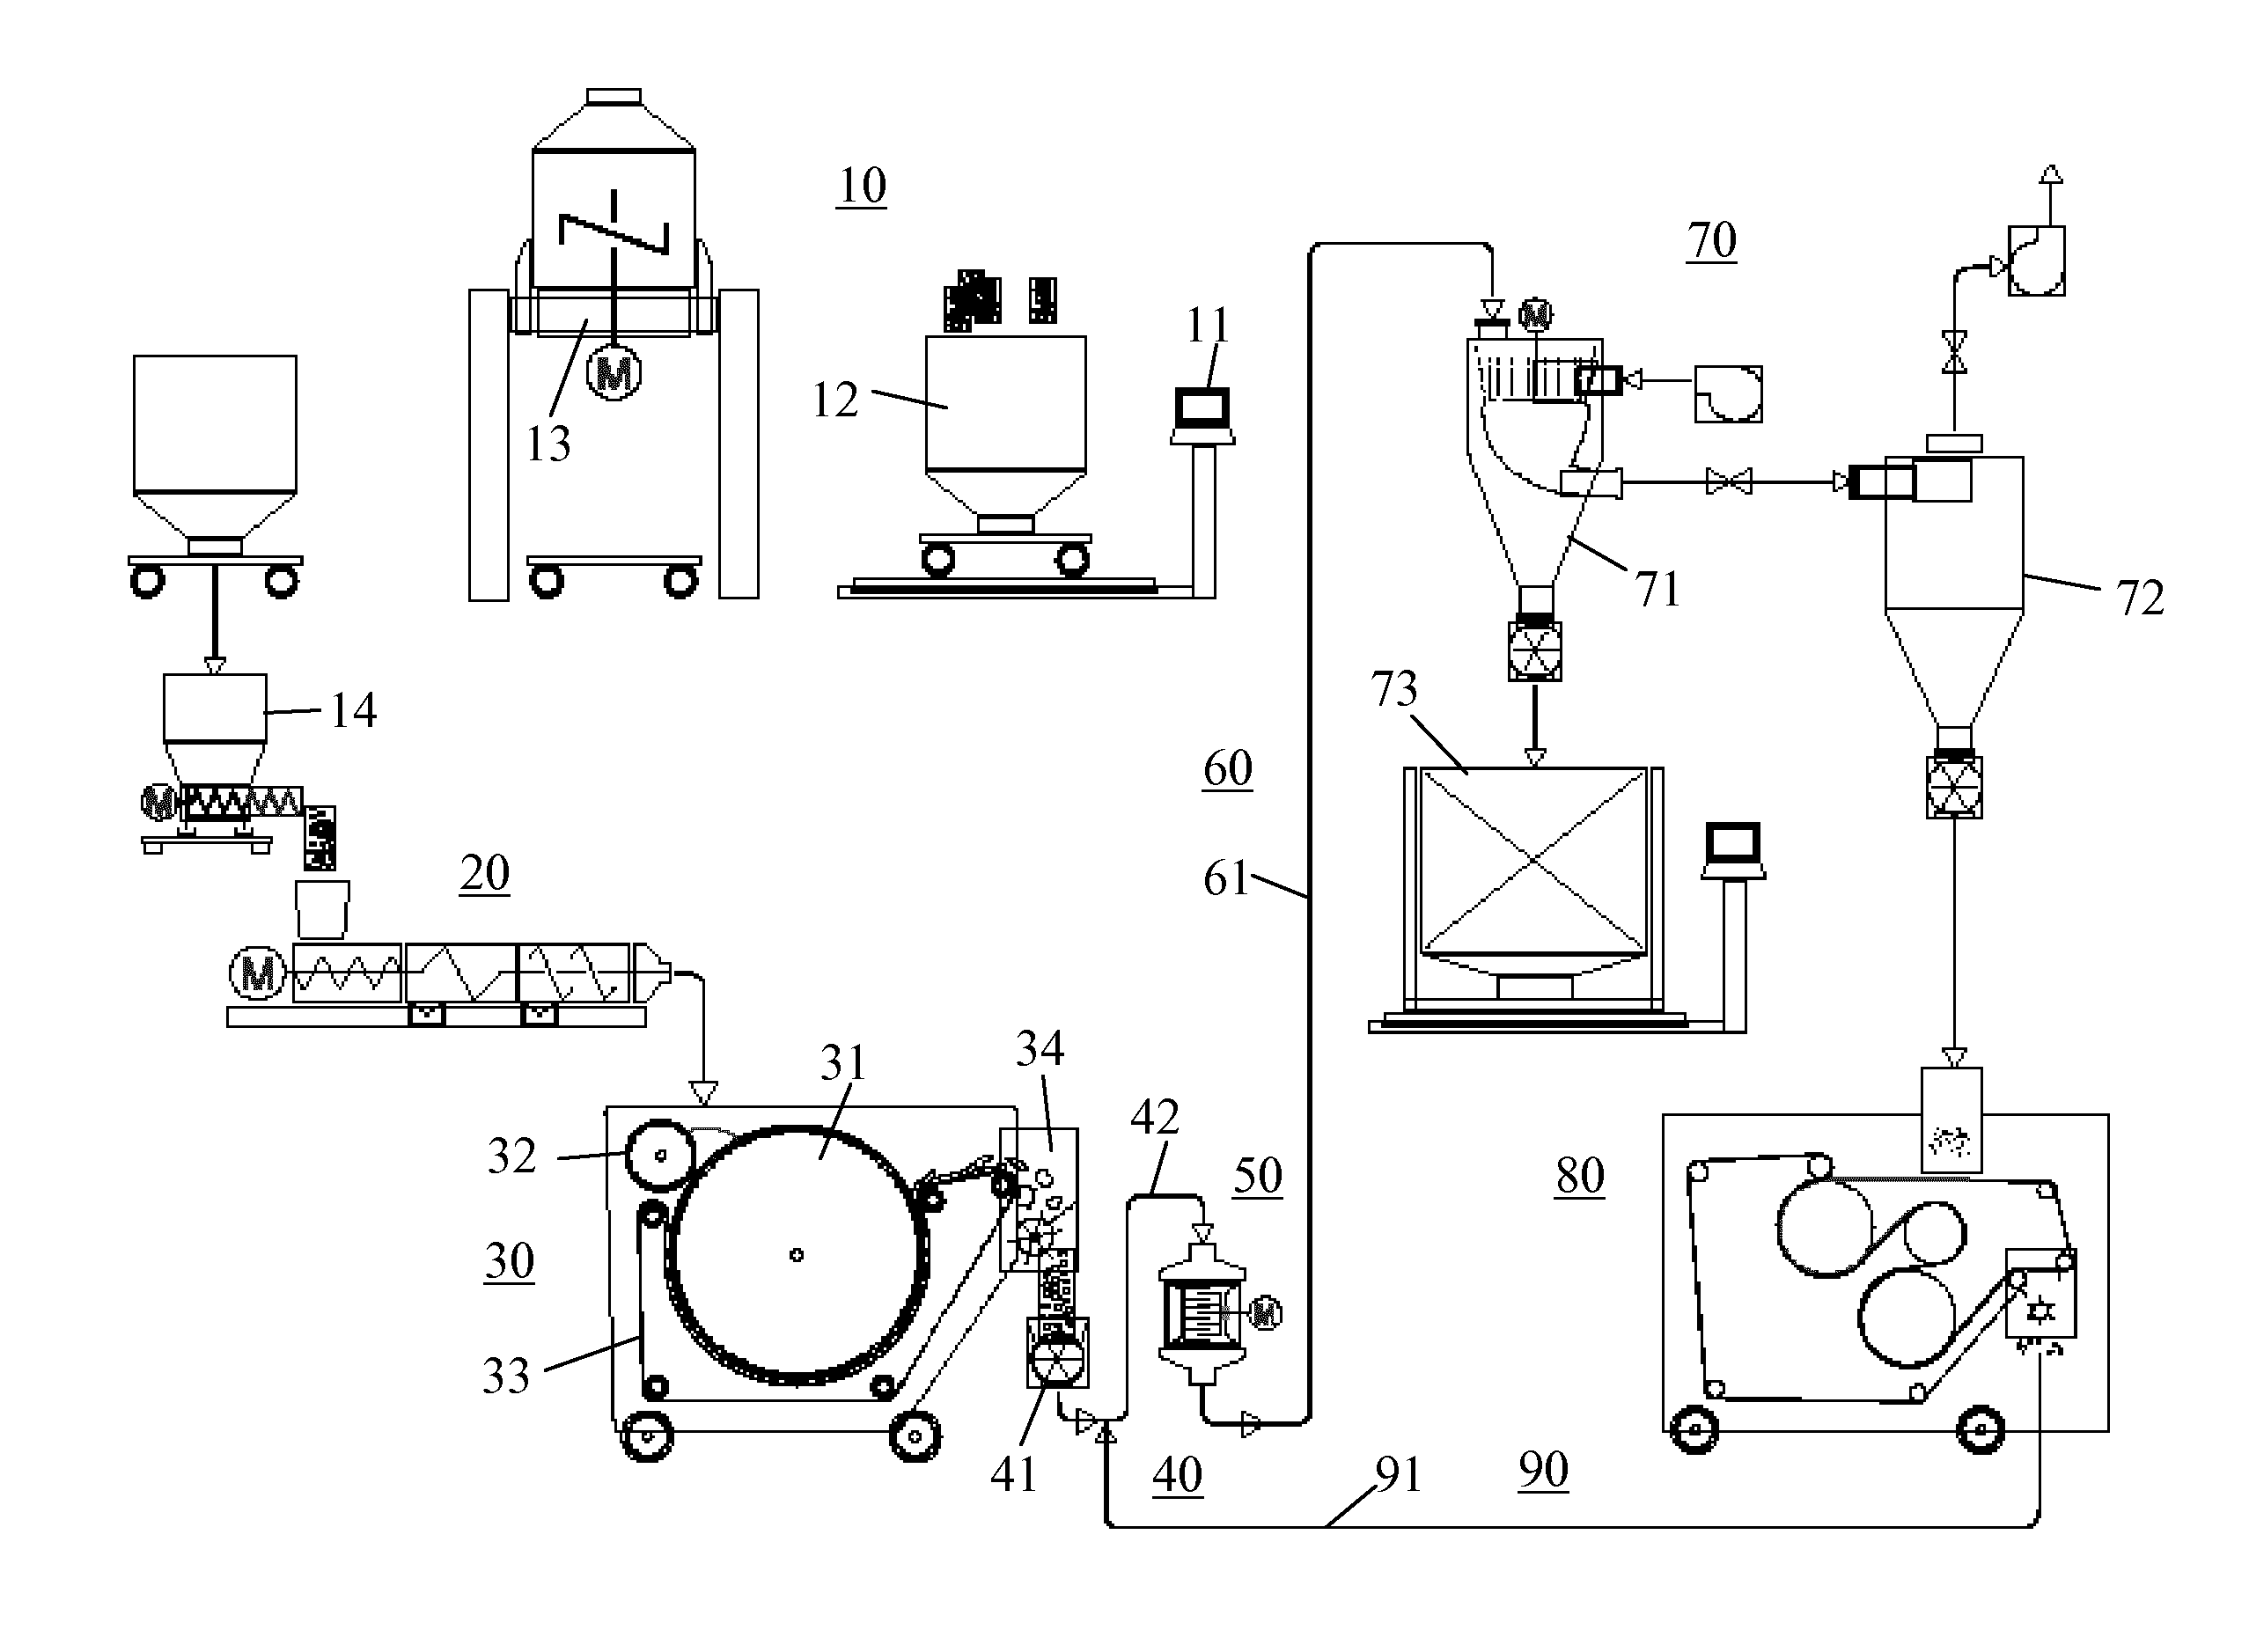 Method for producing powder from a granular, thermoplastic material and device for producing chips from a powdery, thermoplastic material